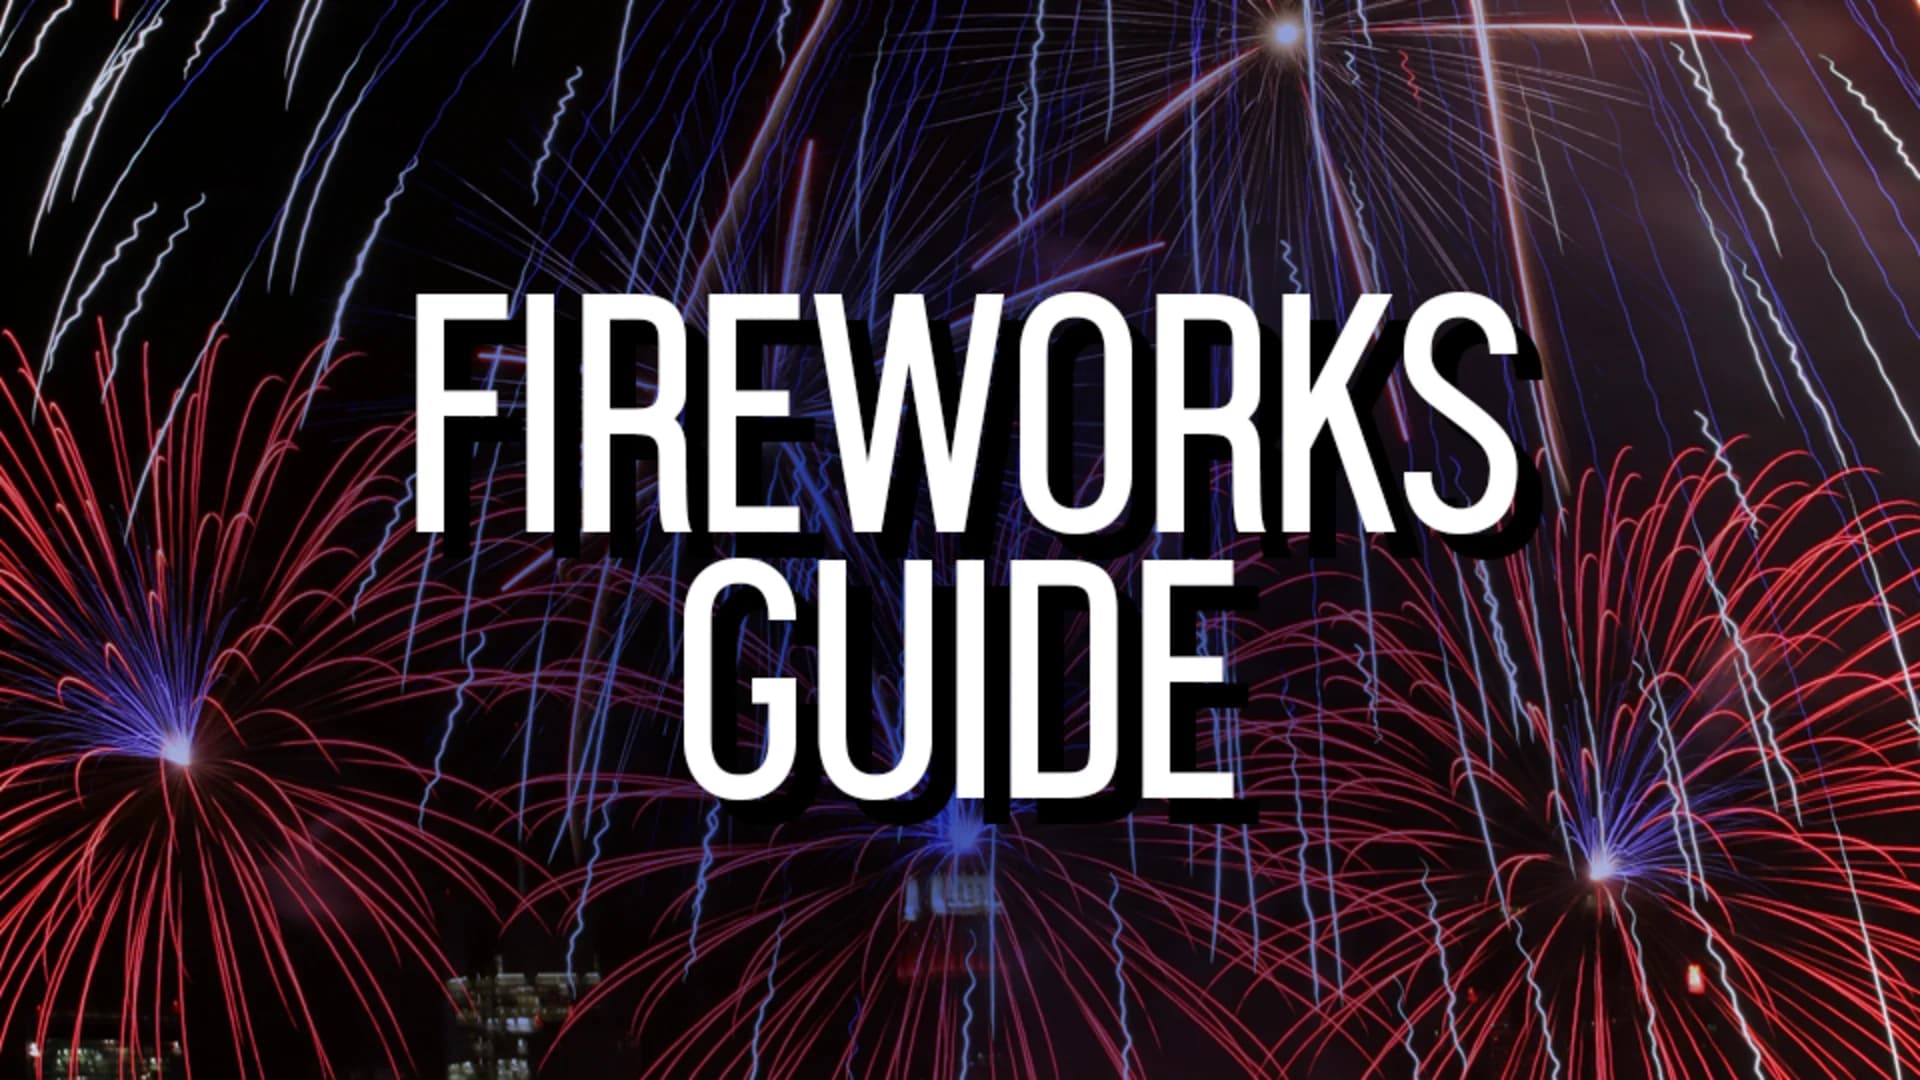 2017 Guide: Where to see fireworks in NYC